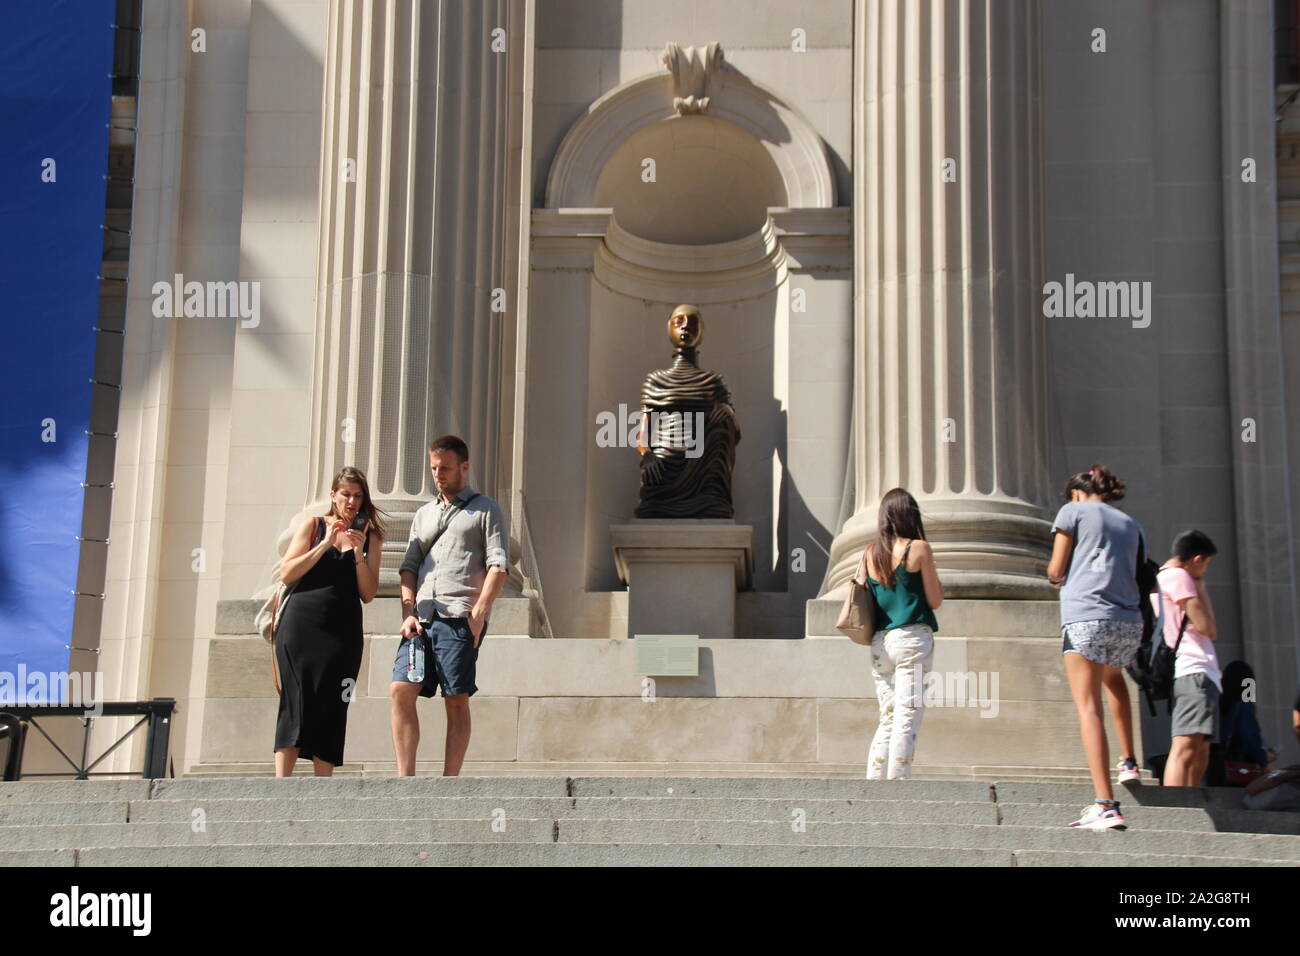 02 October 2019, US, New York: Already during the construction of the facade of the Metropolitan Museum in New York, four niches for sculptures were left open - now they have been filled for the first time in 117 years. Four different bronze sculptures by the Kenyan-American artist Wangechi Mutu, inspired by African women's customs, have recently been on display on the façade. "The Seated I, II, III, and IV" is the first installation of a new action by the renowned museum at Central Park in Manhattan. Each year, another artist is commissioned by the museum to "animate" its façade. The four pre Stock Photo